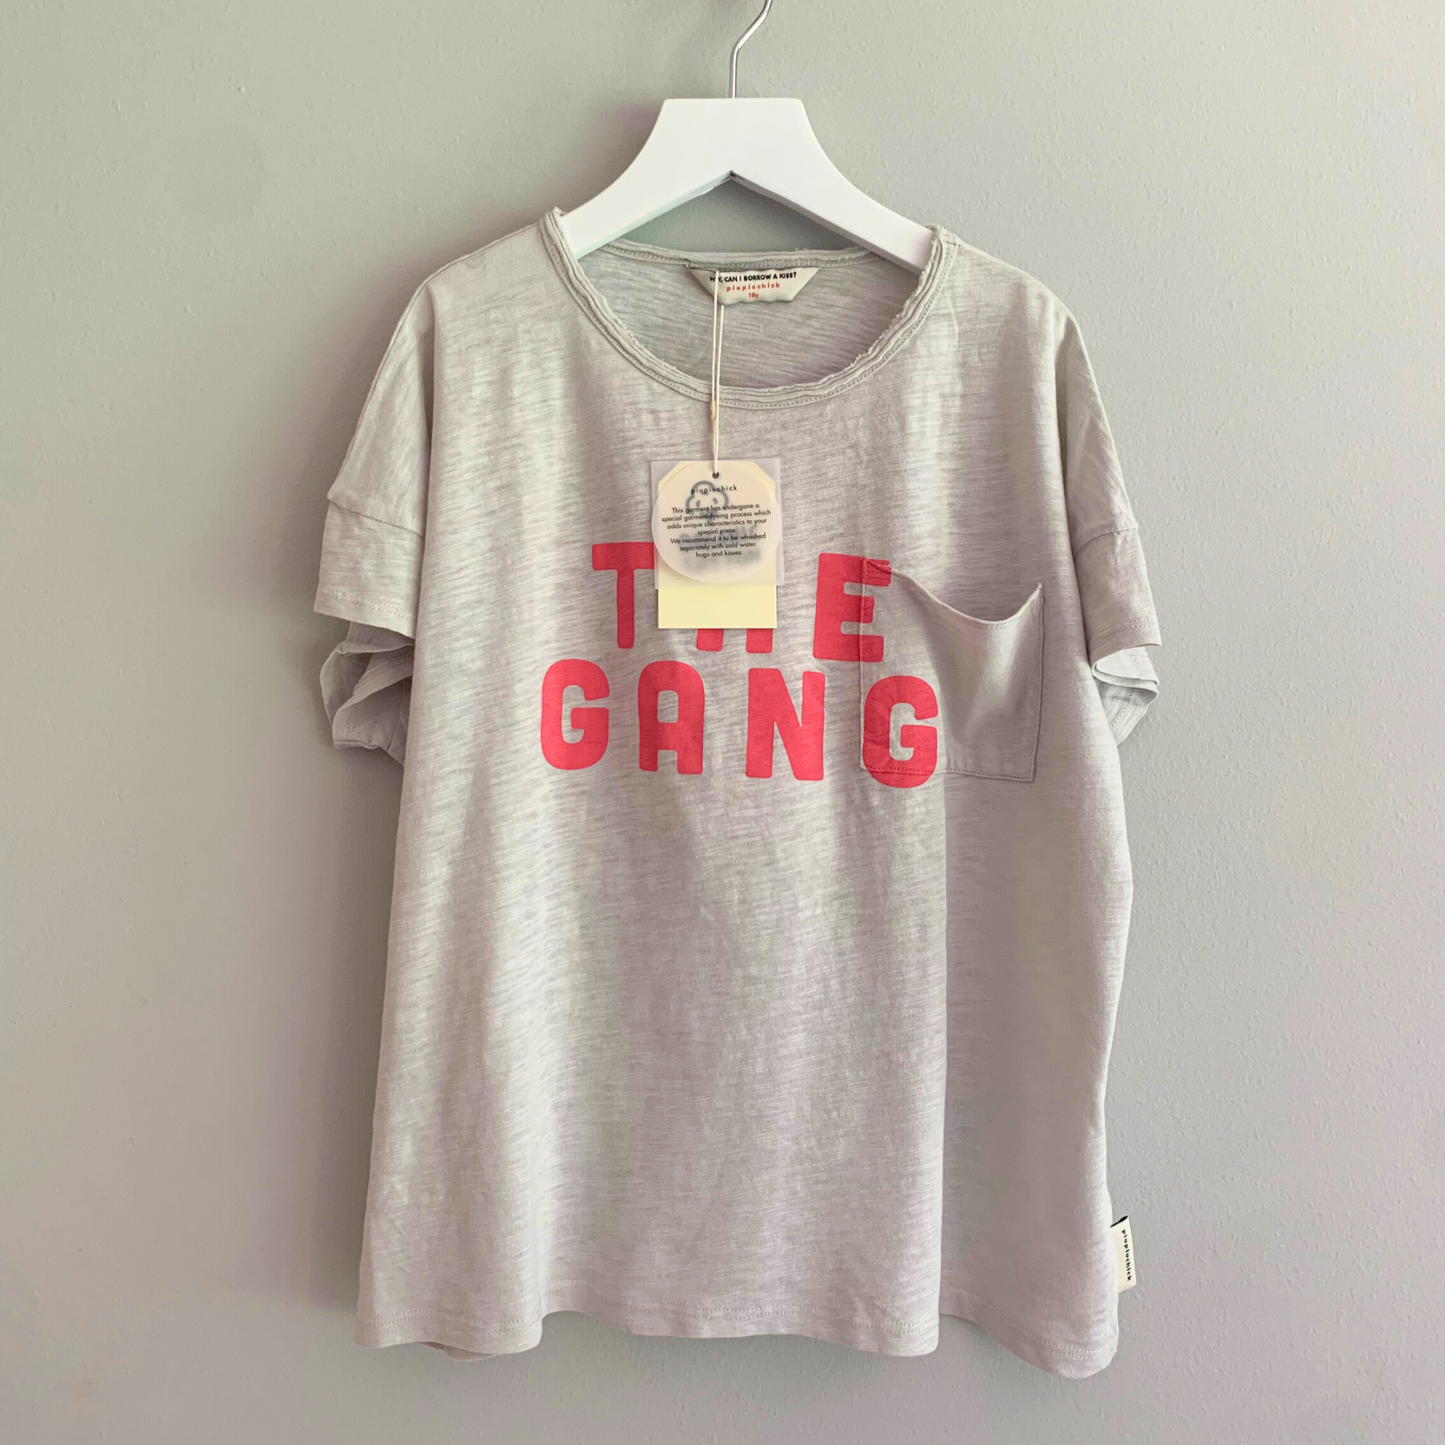 Light Grey The Gang T-Shirt (New with Tags) - Size 10Y